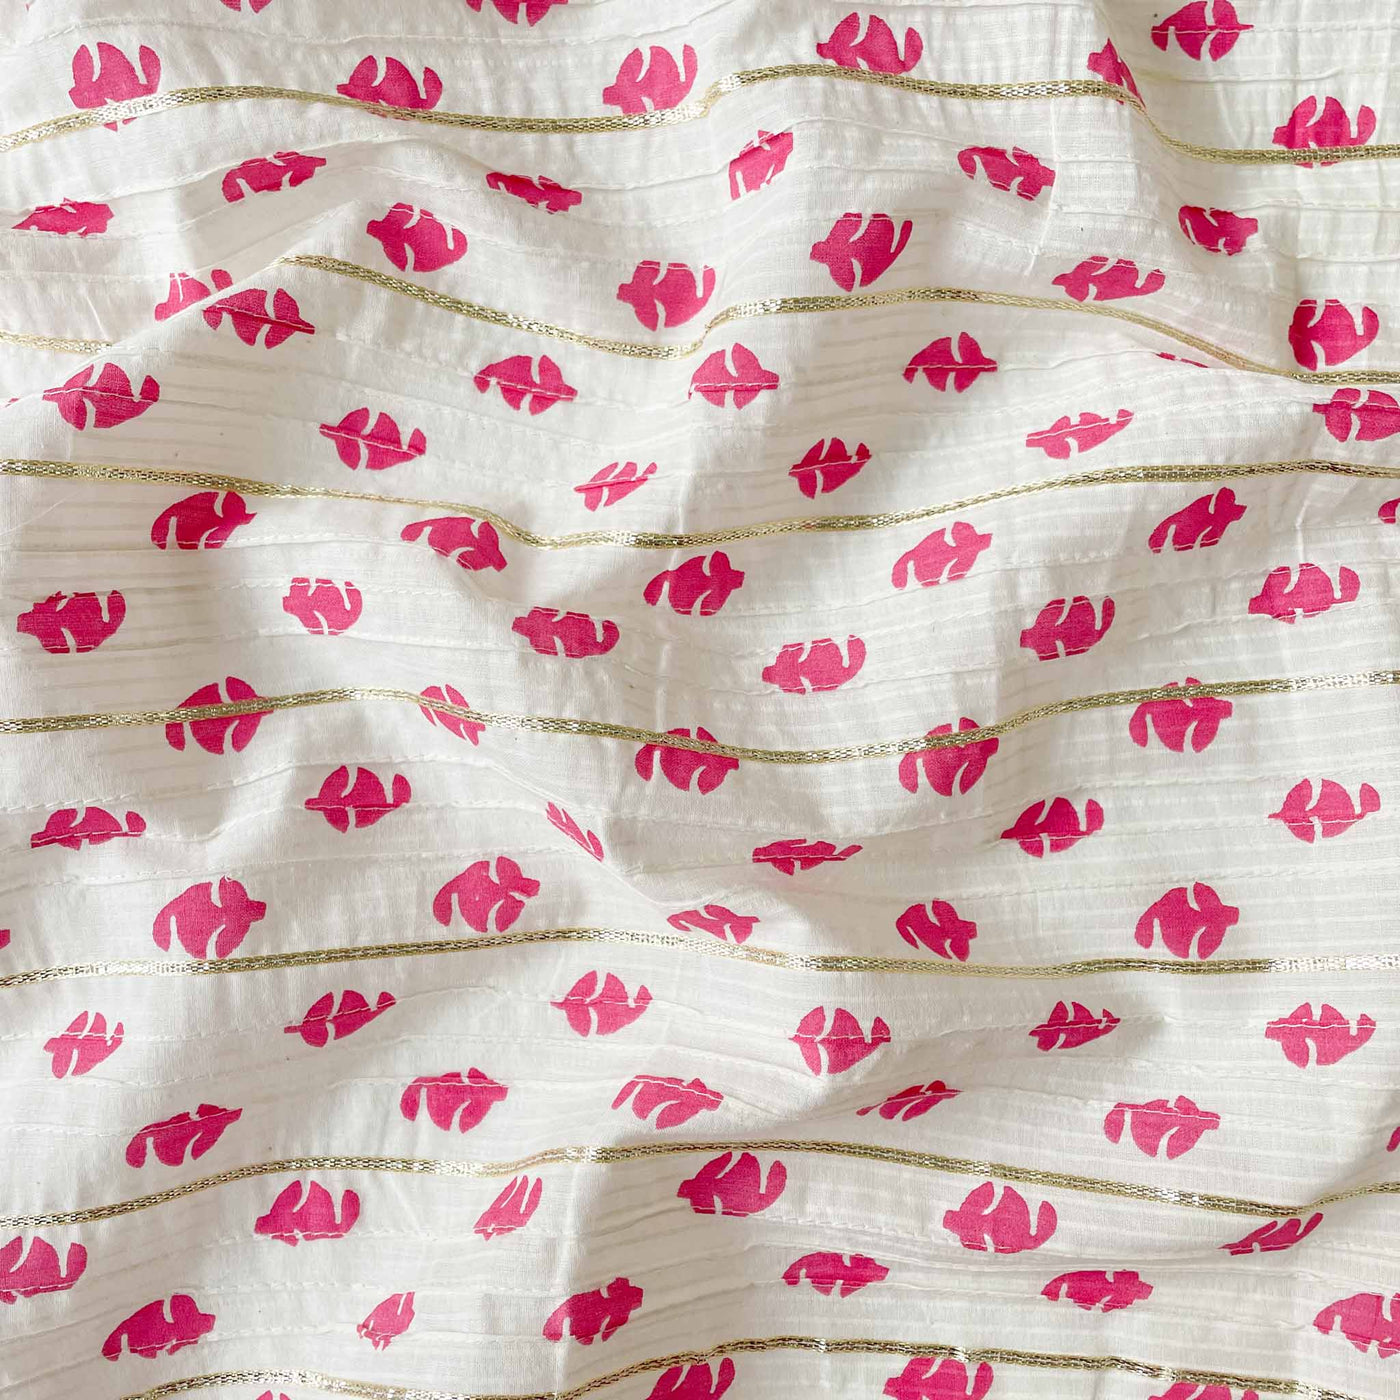 Fabric Pandit Fabric White & Pink Paisely Hand Block Printed Pintucks Pure Cotton Fabric (Width 36 Inches)